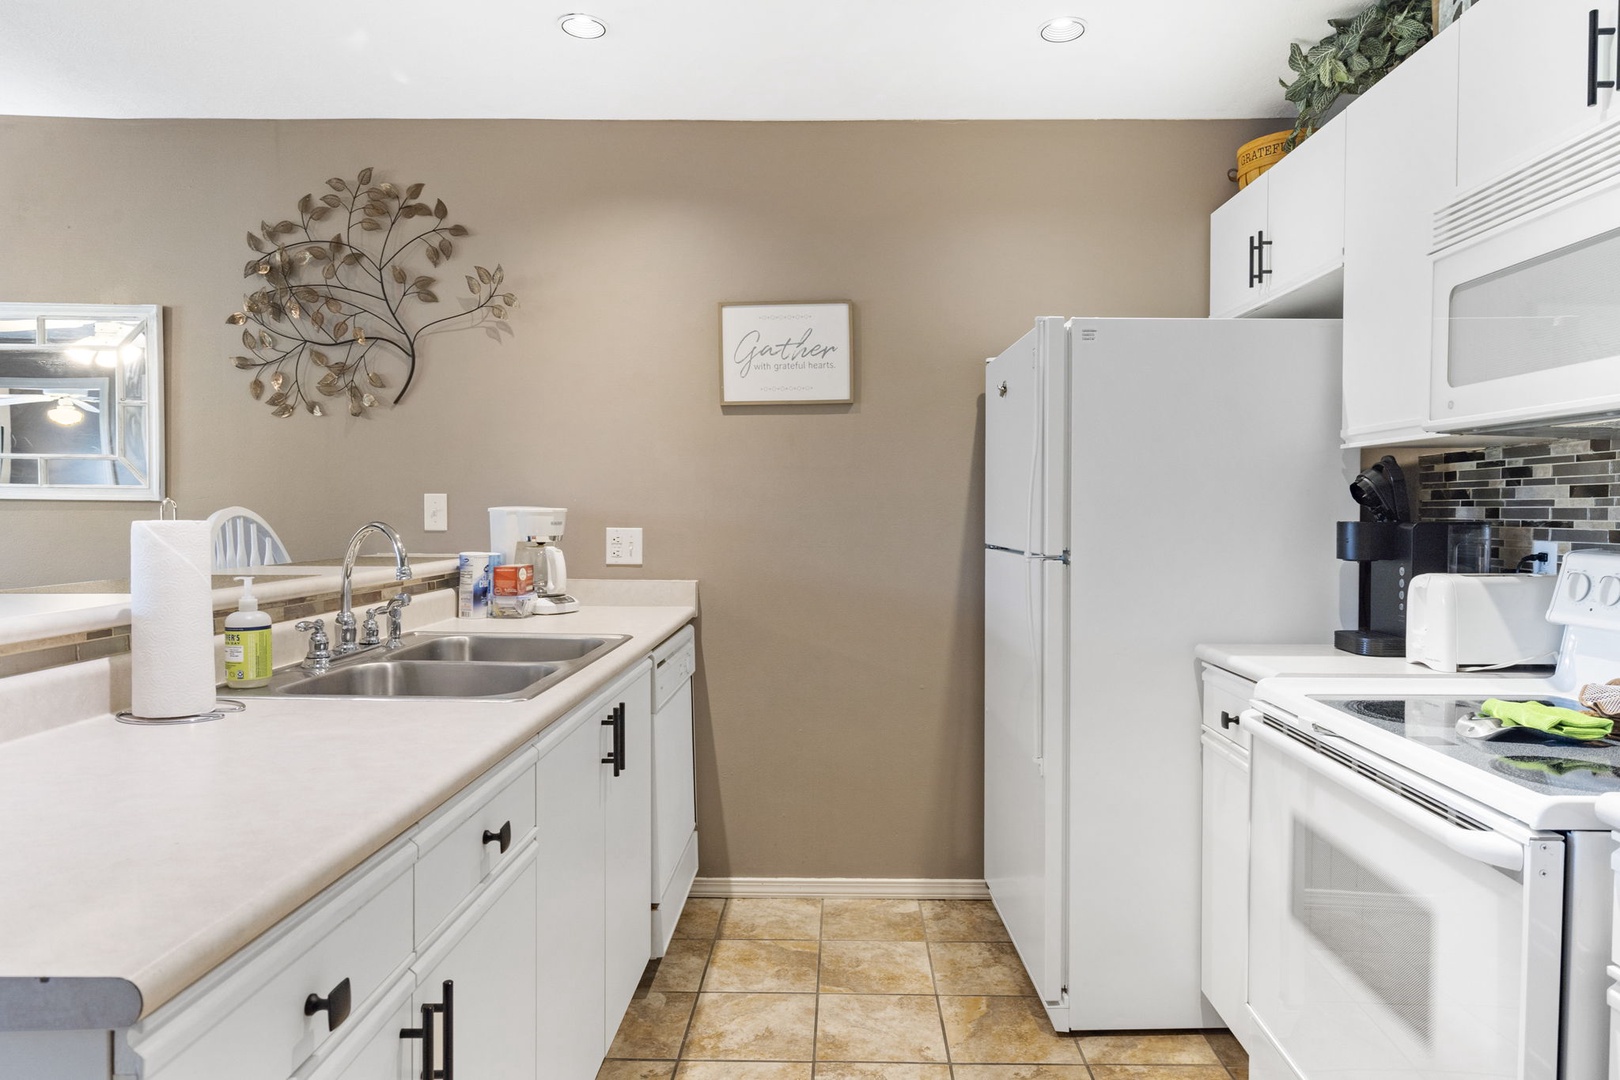 The Kitchen offers plenty of counter space and Keurig coffee maker for your stay